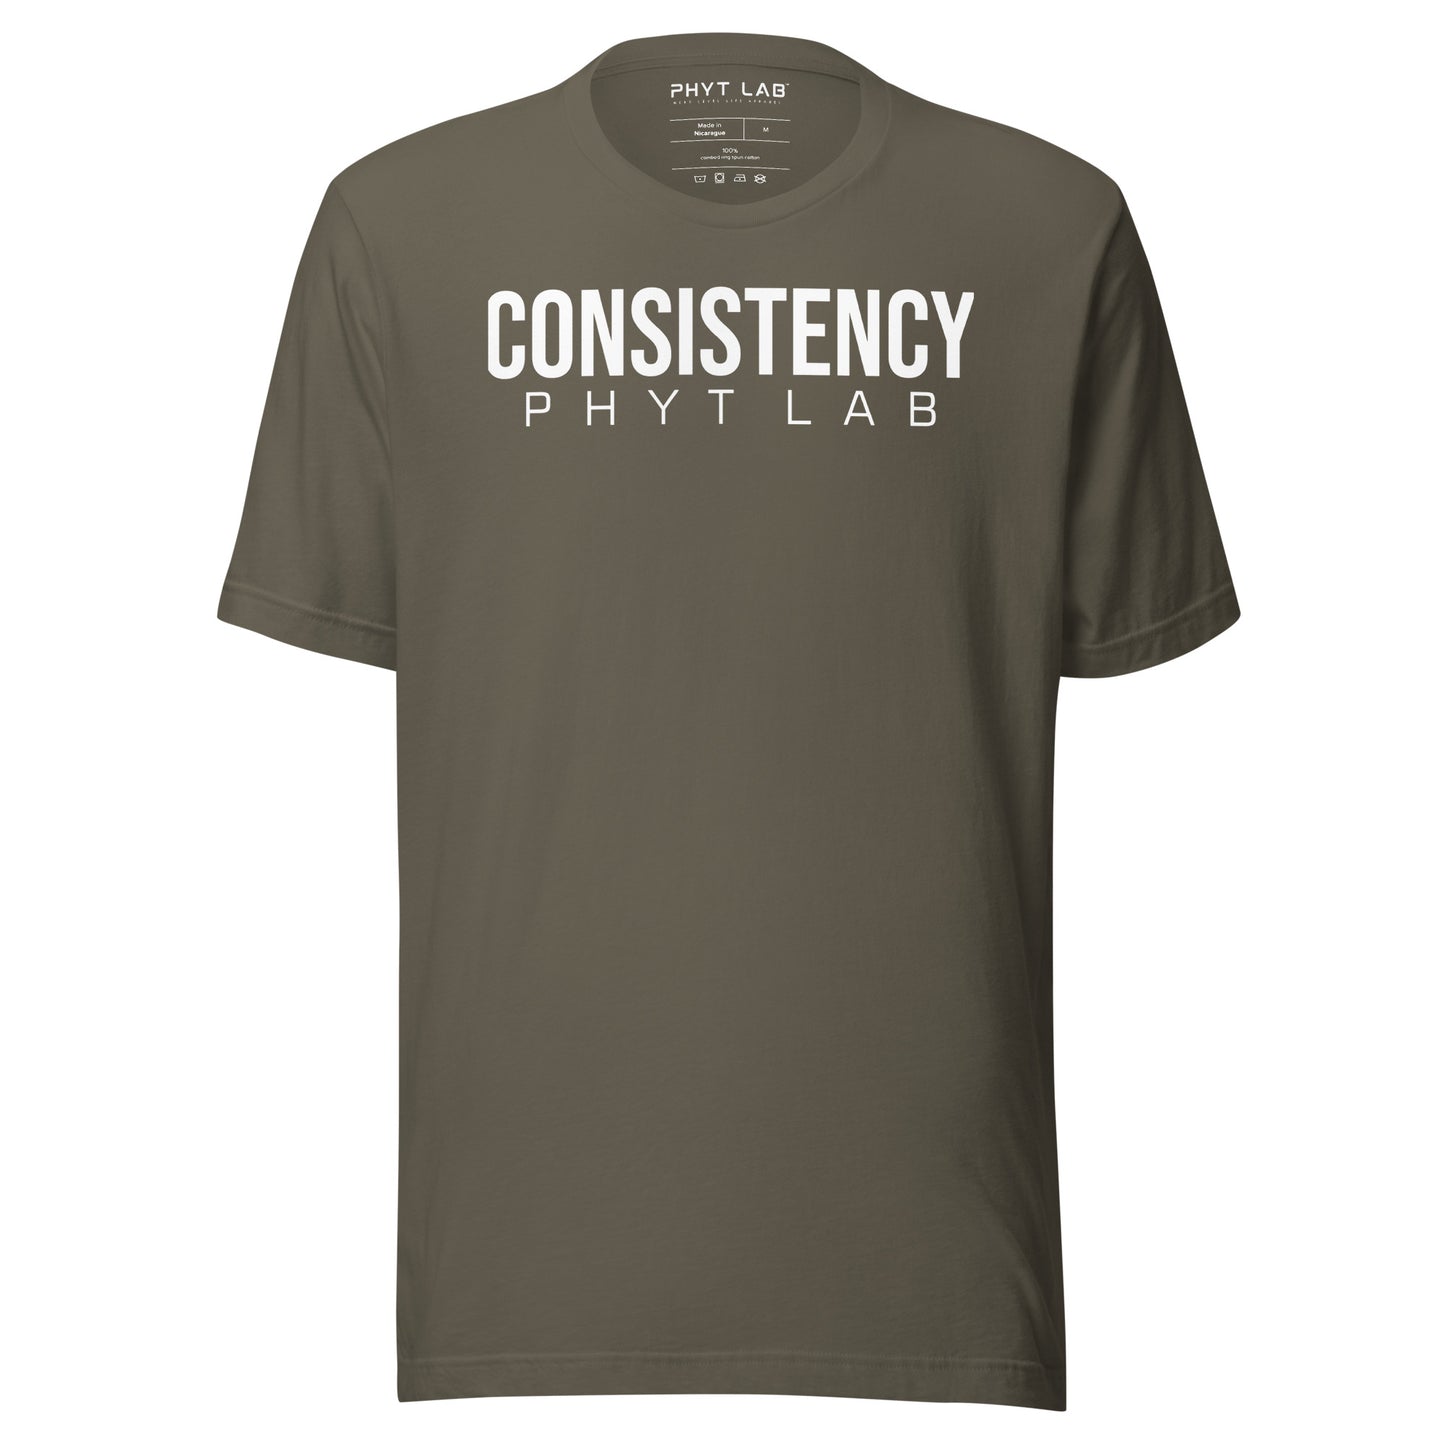 Consistency Statement T-Shirt (NEW Colors)